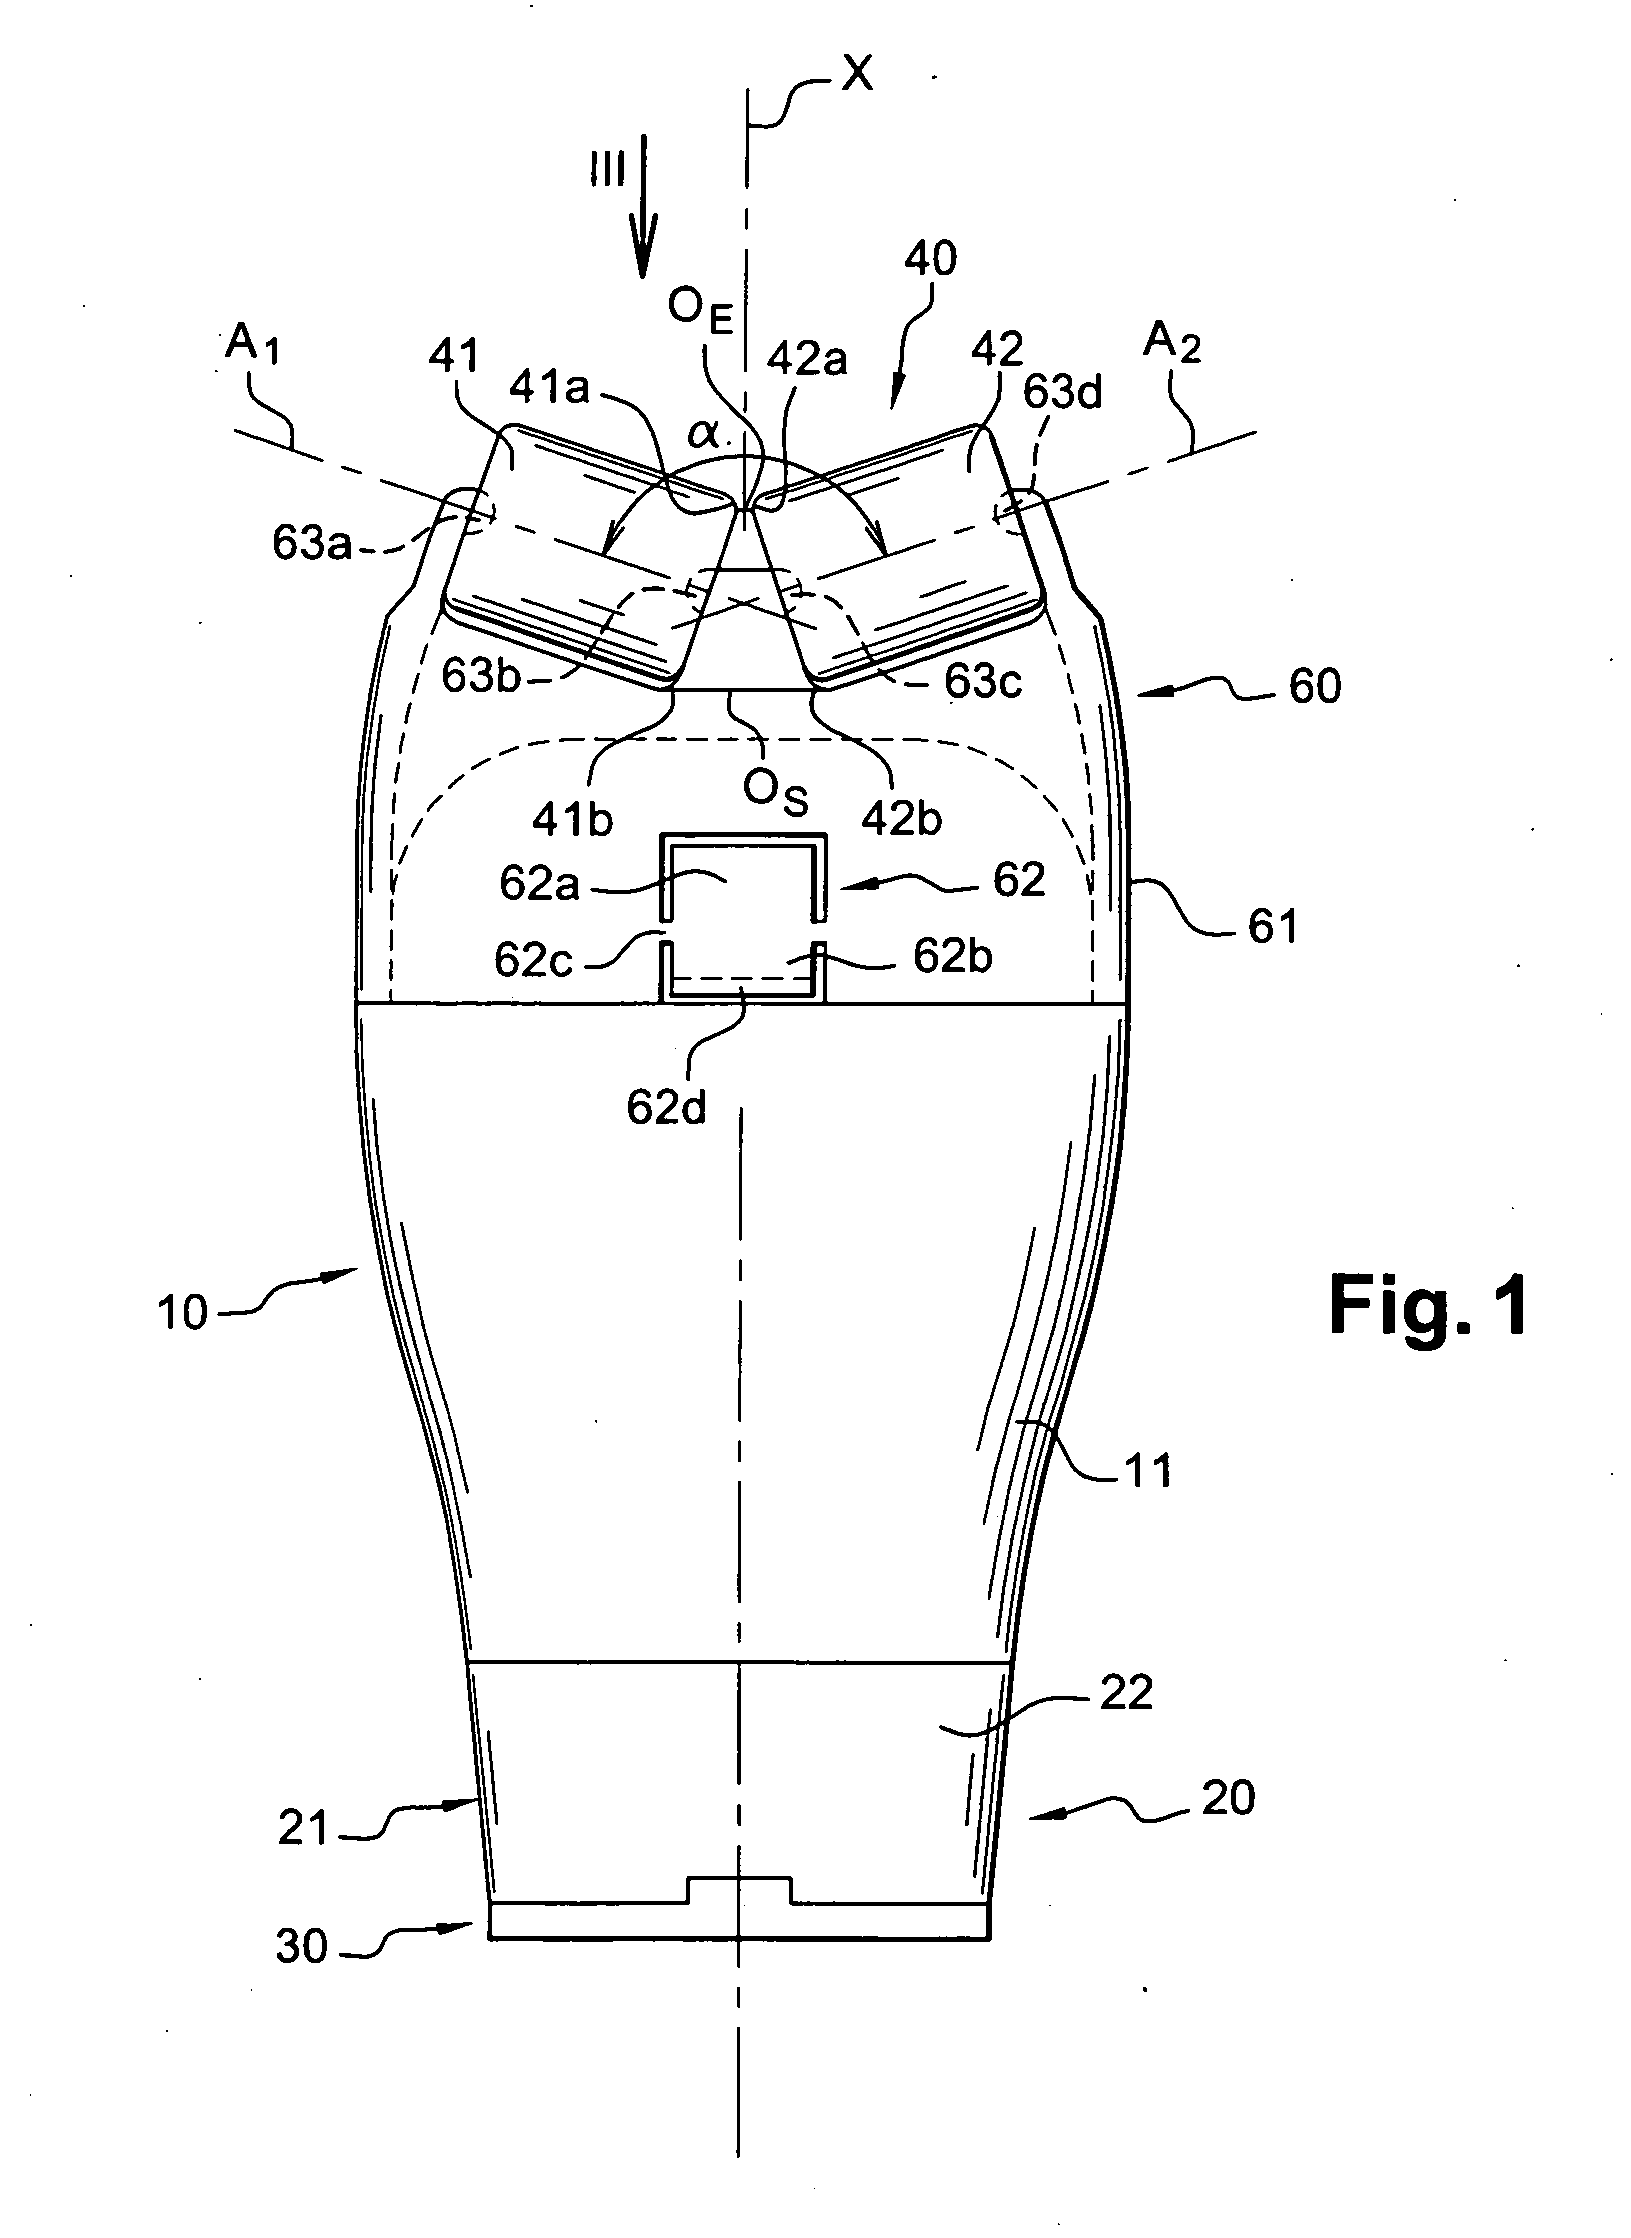 Packaging and applicator unit for a product including a massage device